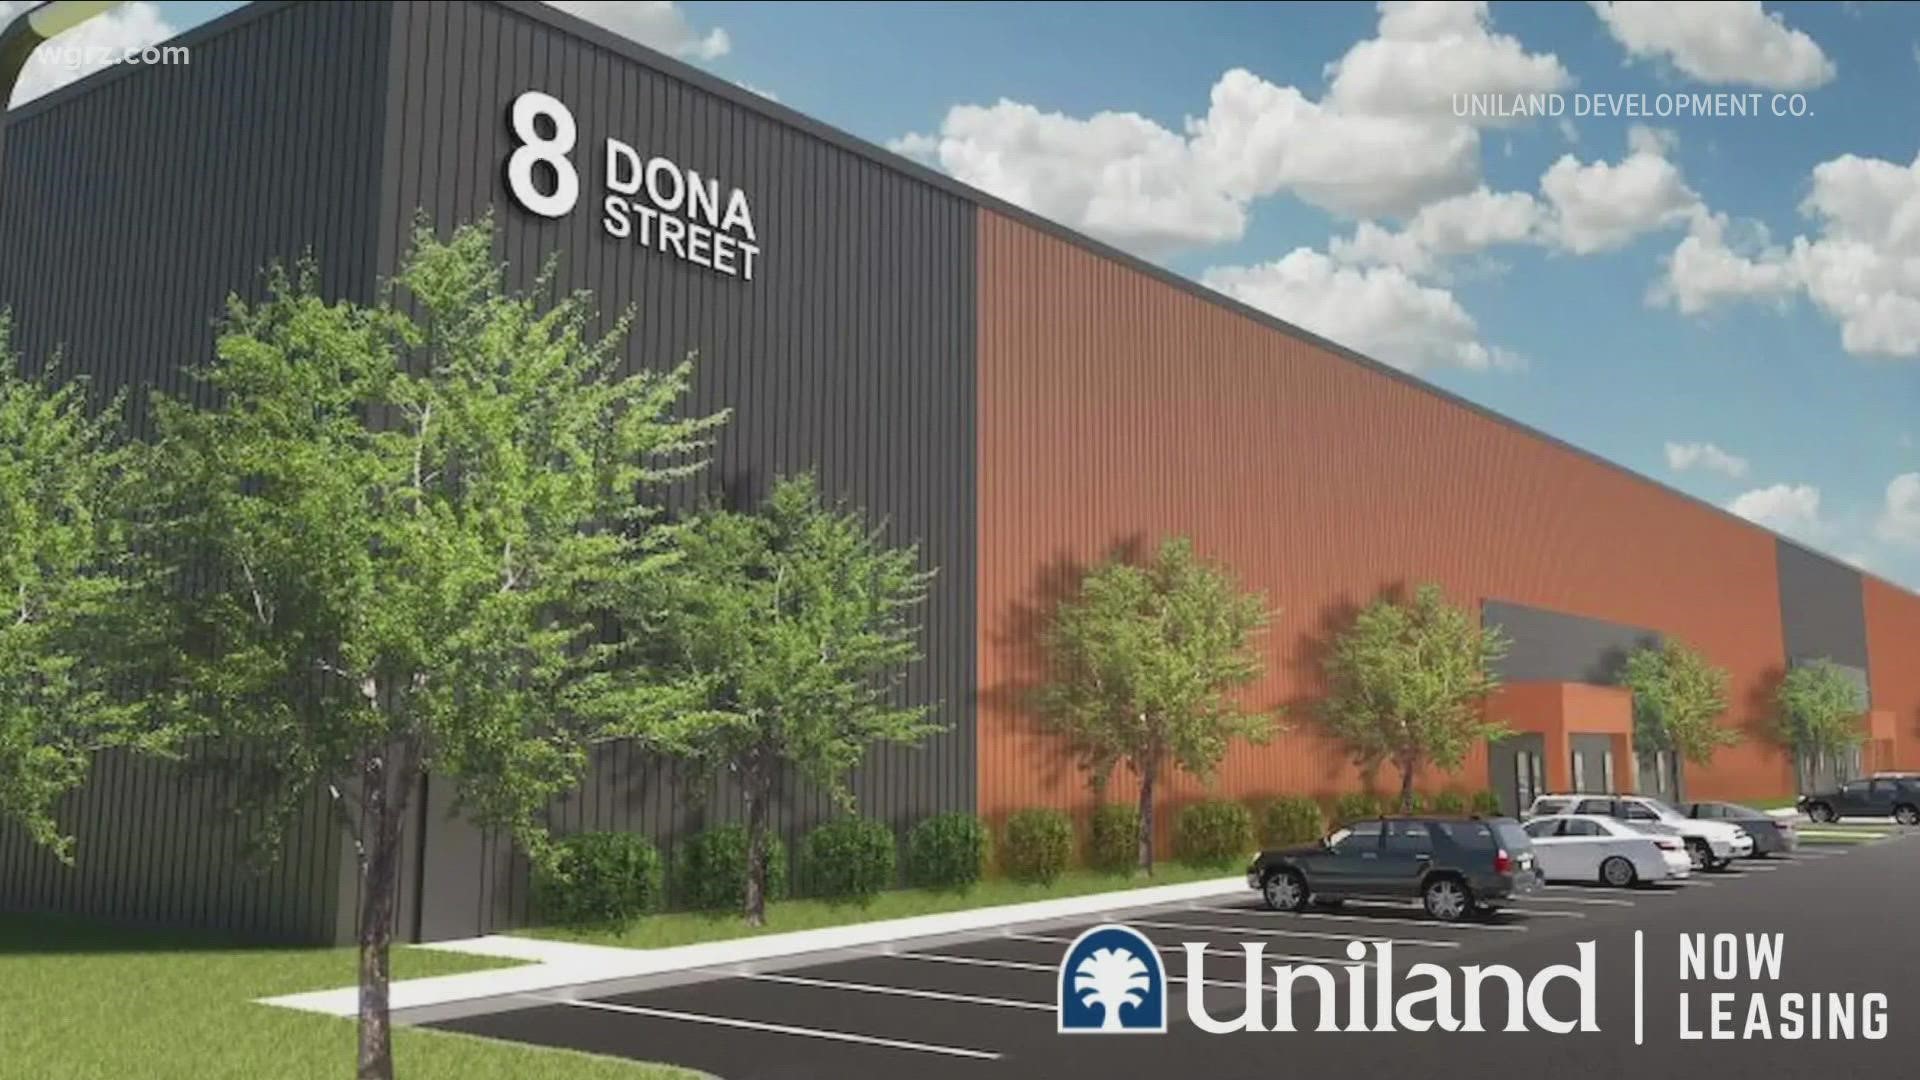 Uniland will pay 200-thousand dollars for the land from the Buffalo and Erie County Industrial Land Development Corp.